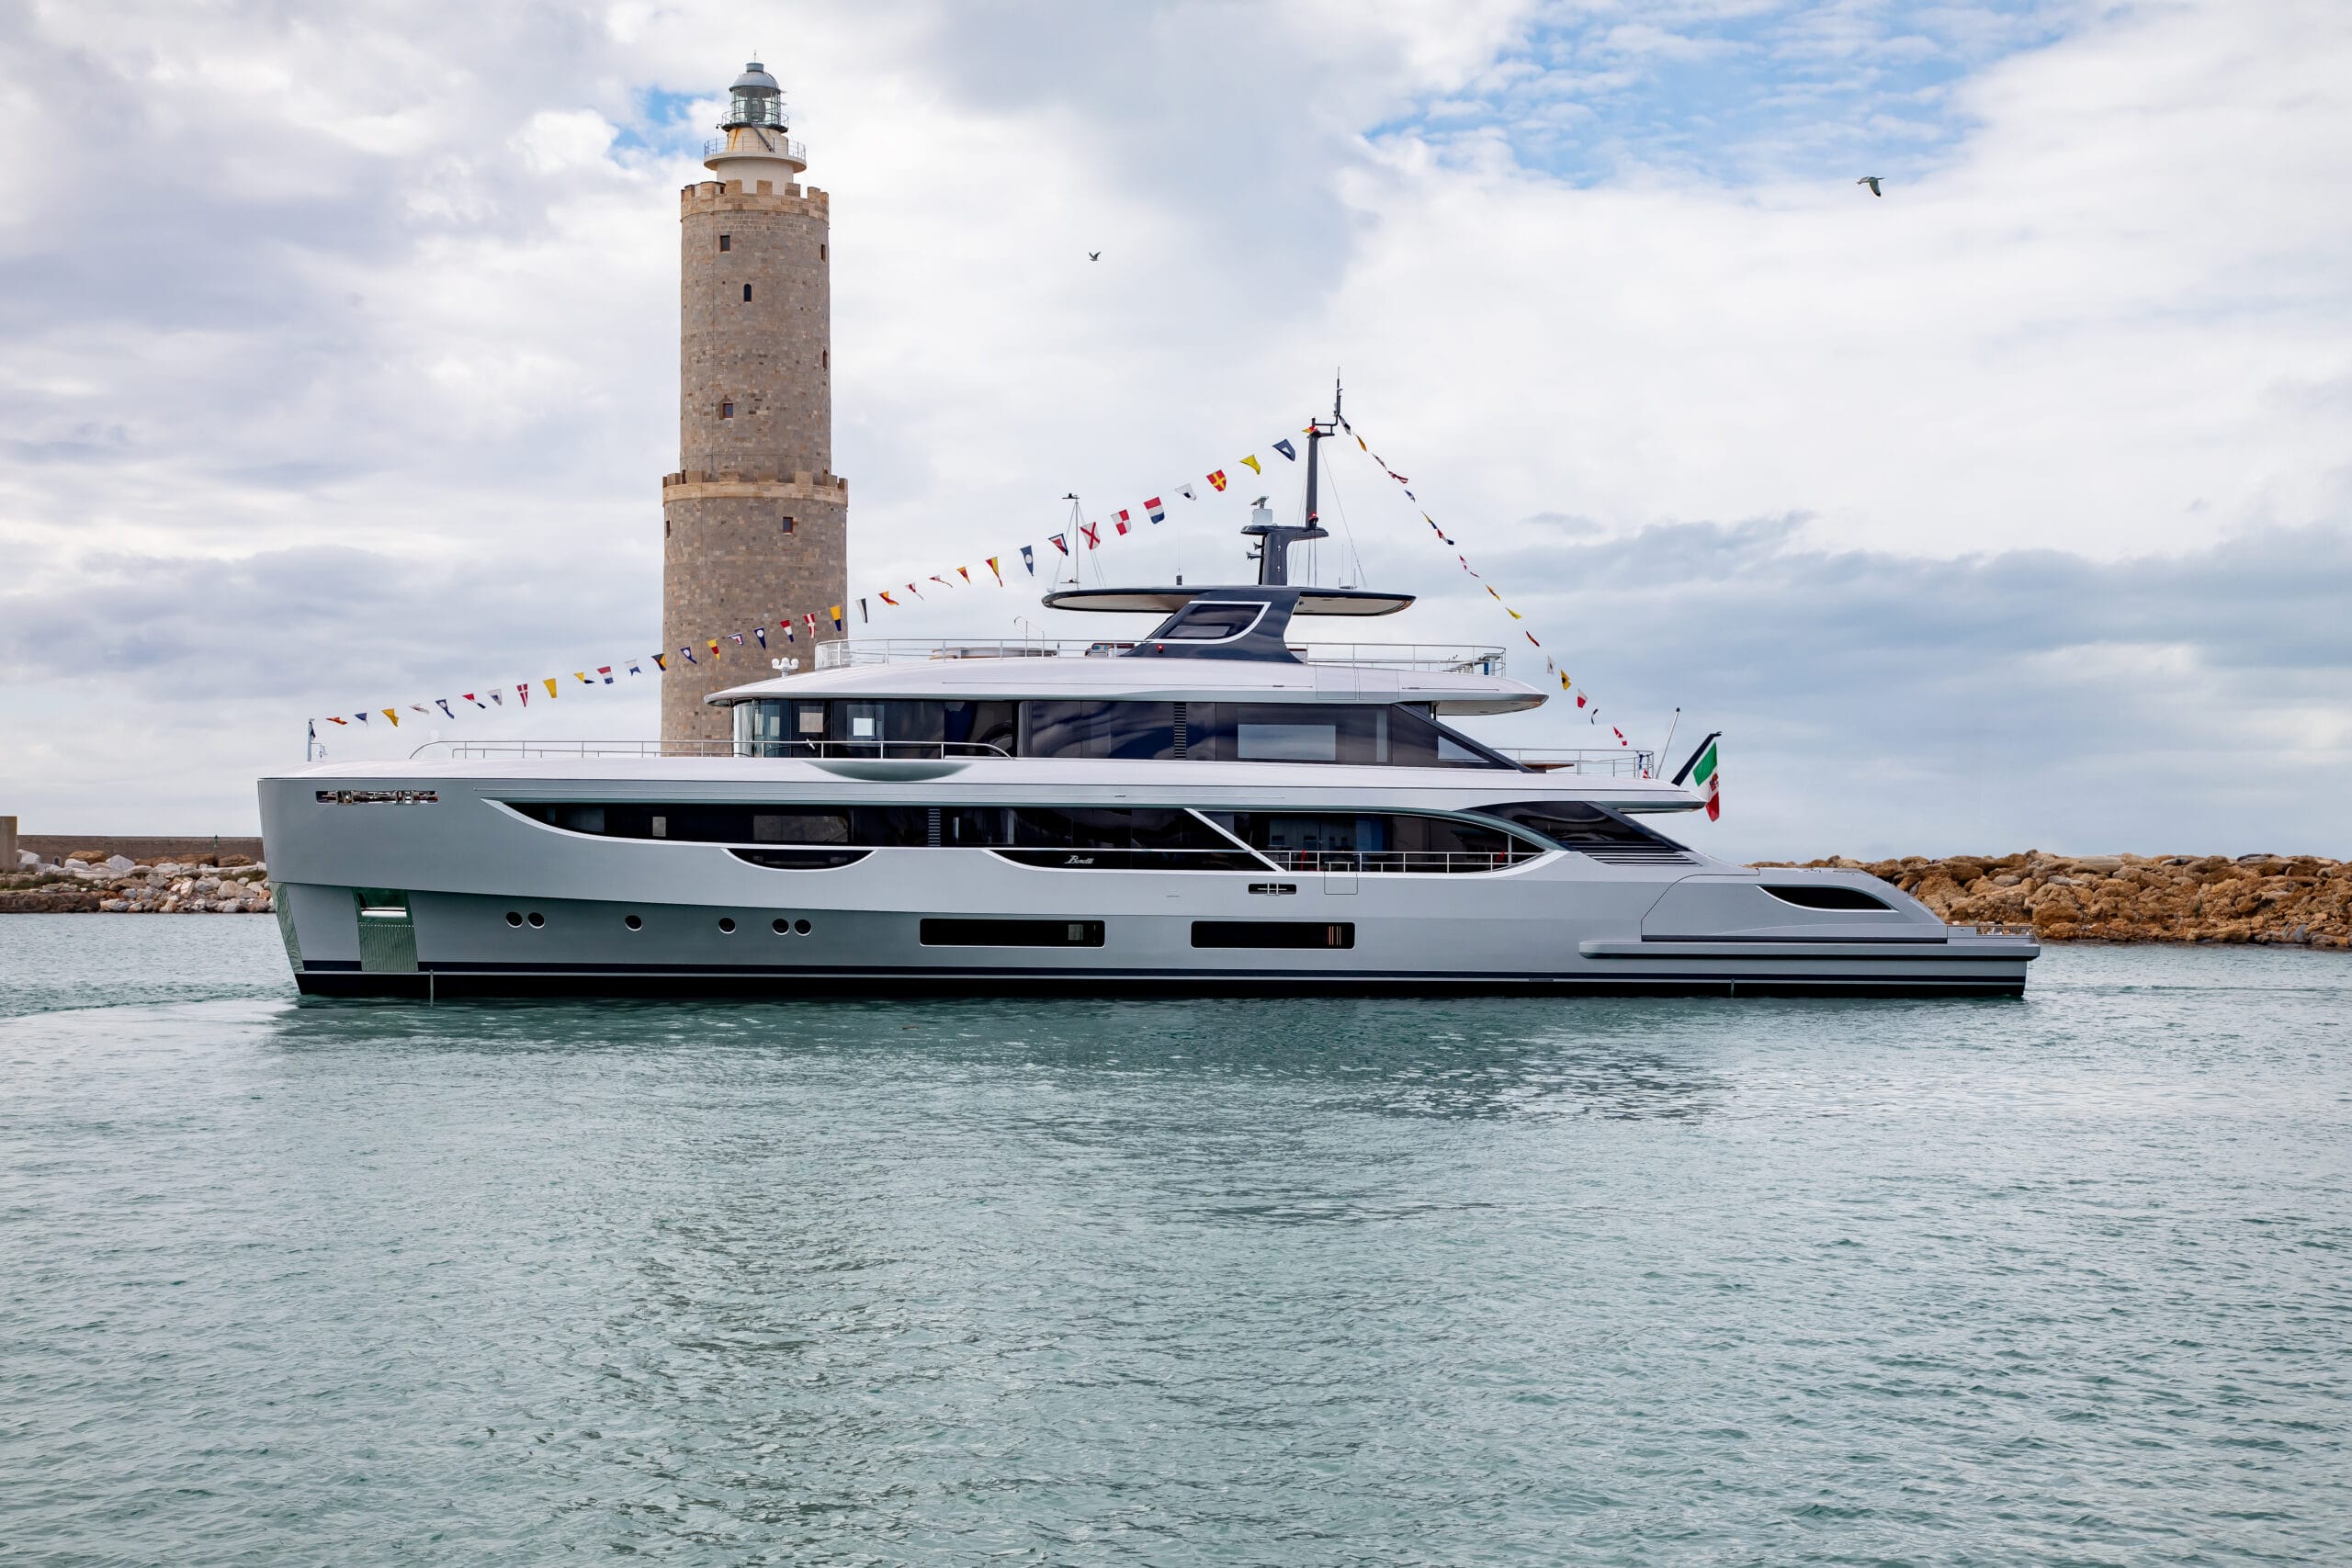 BENETTI HAS LAUNCHED A NEW OASIS 40M, M/Y COSMICO